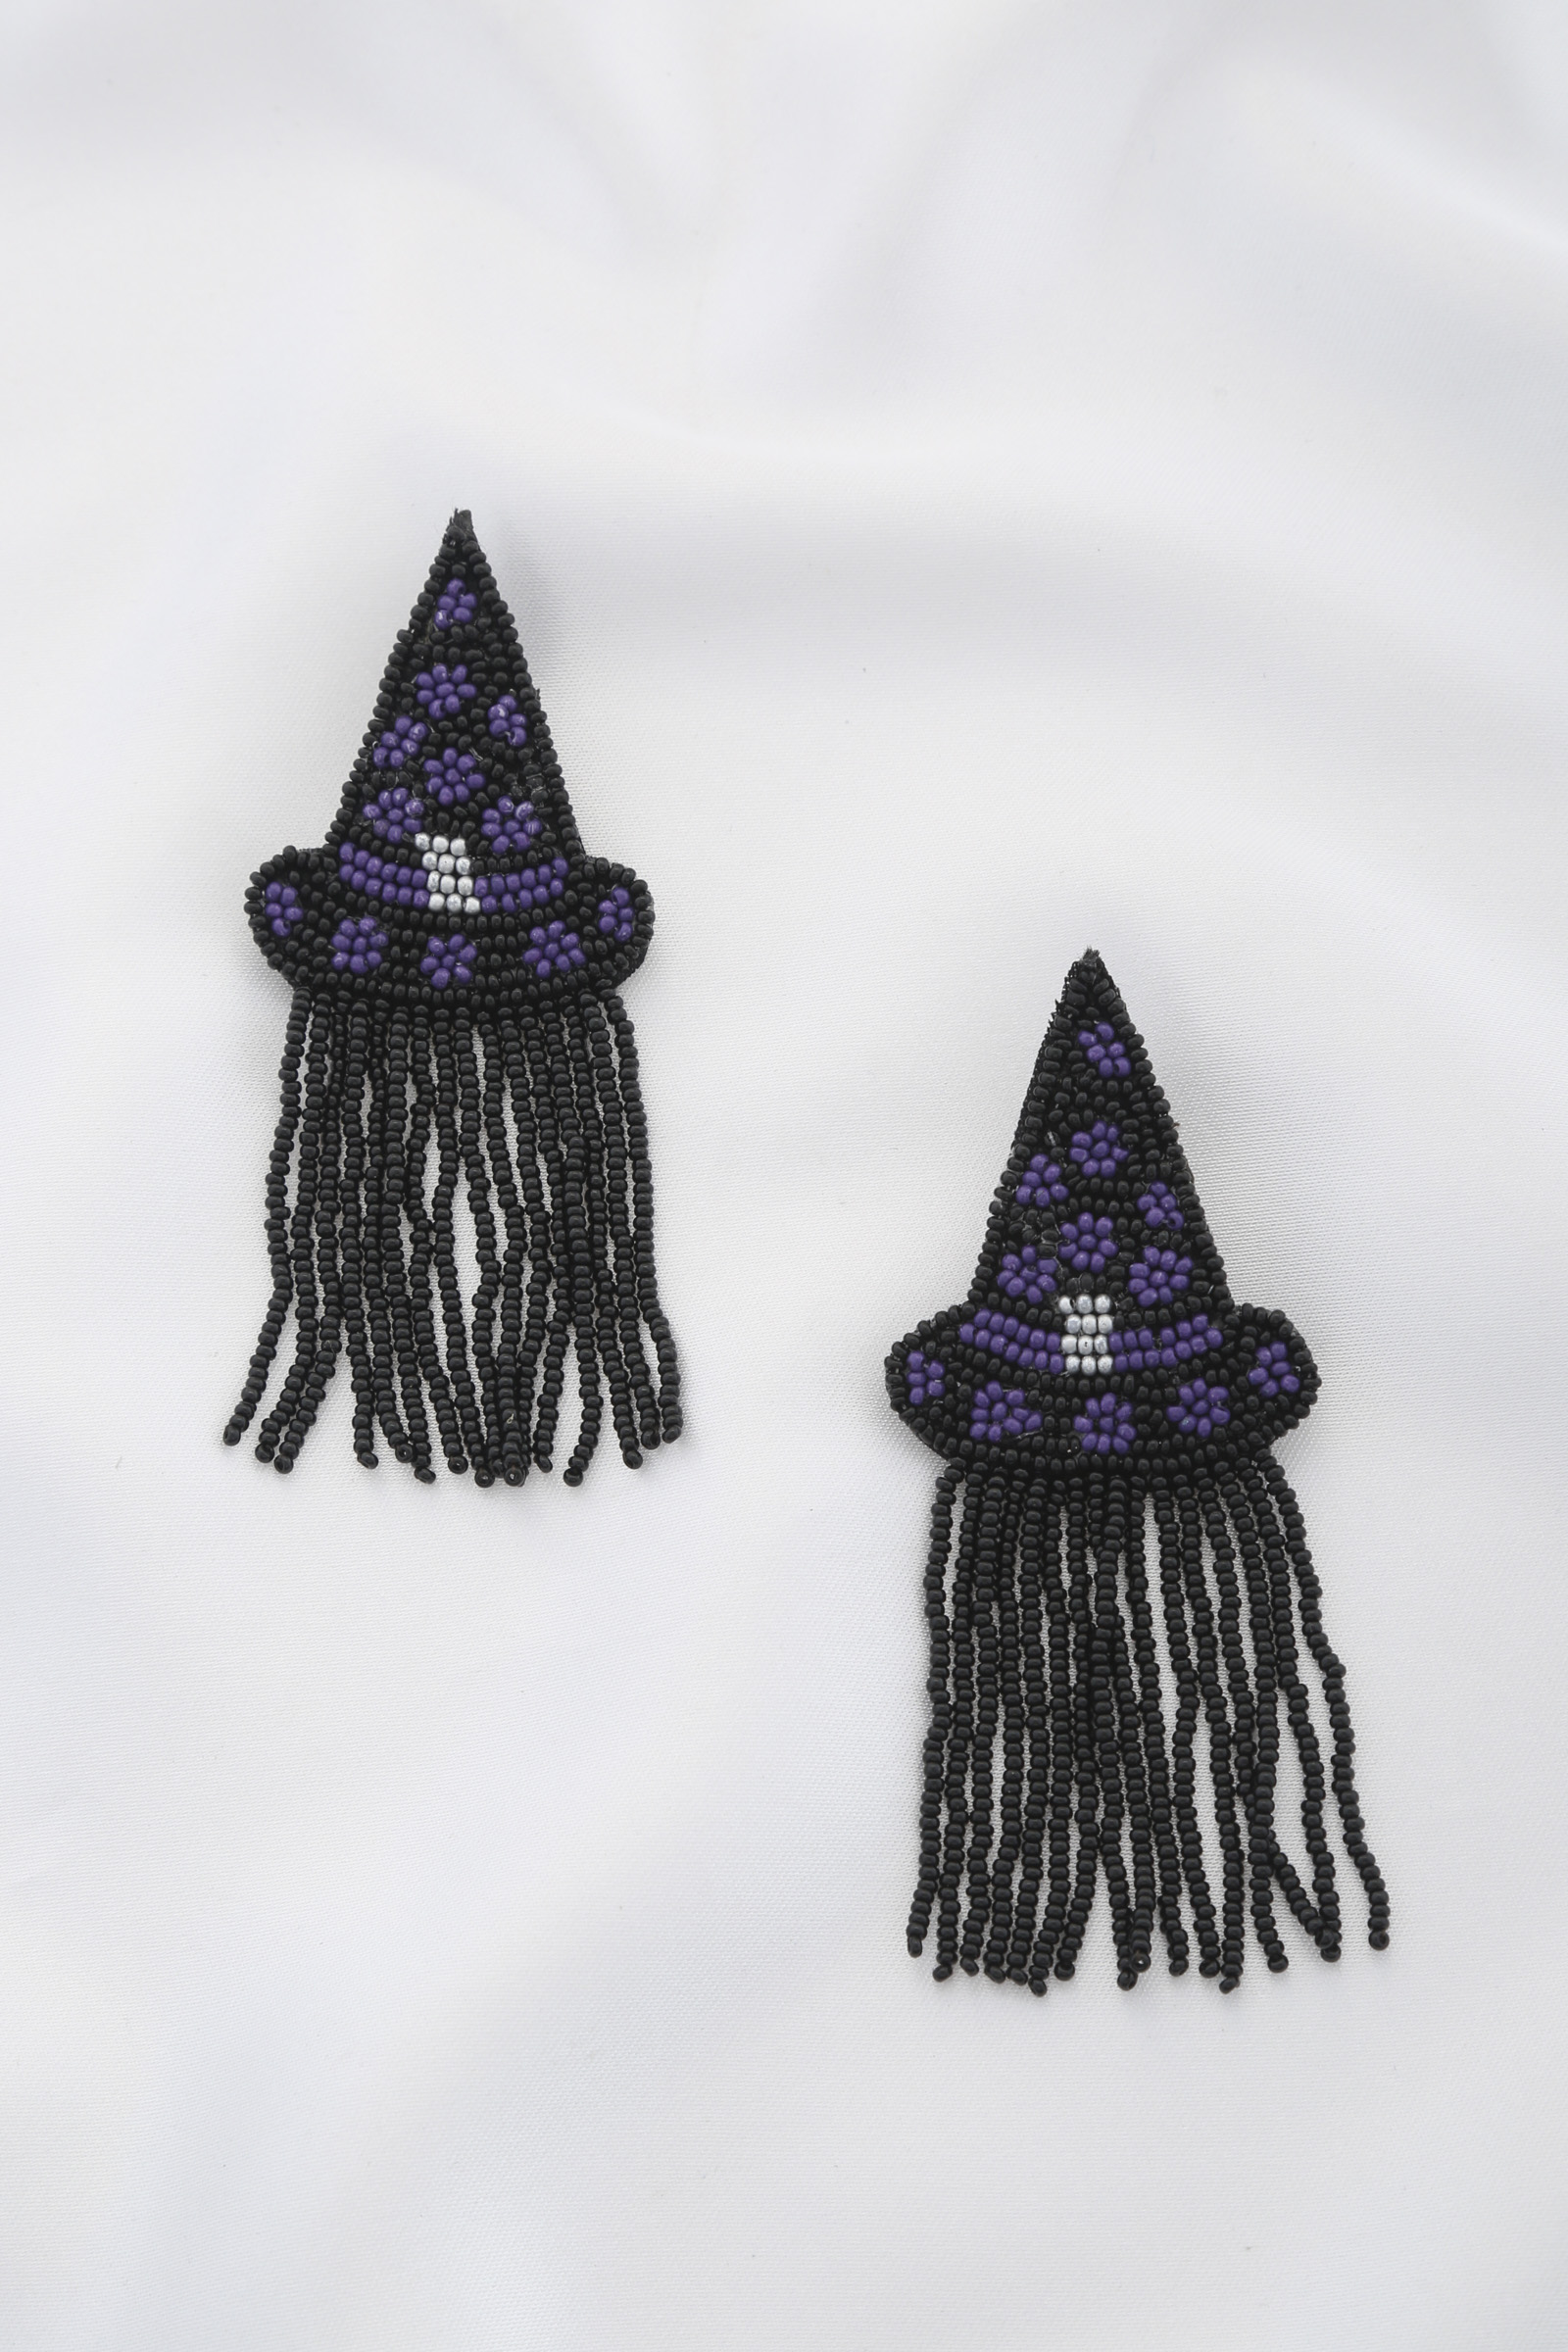 HALLOWEEN WITCH HAT SEED BEAD EARRING